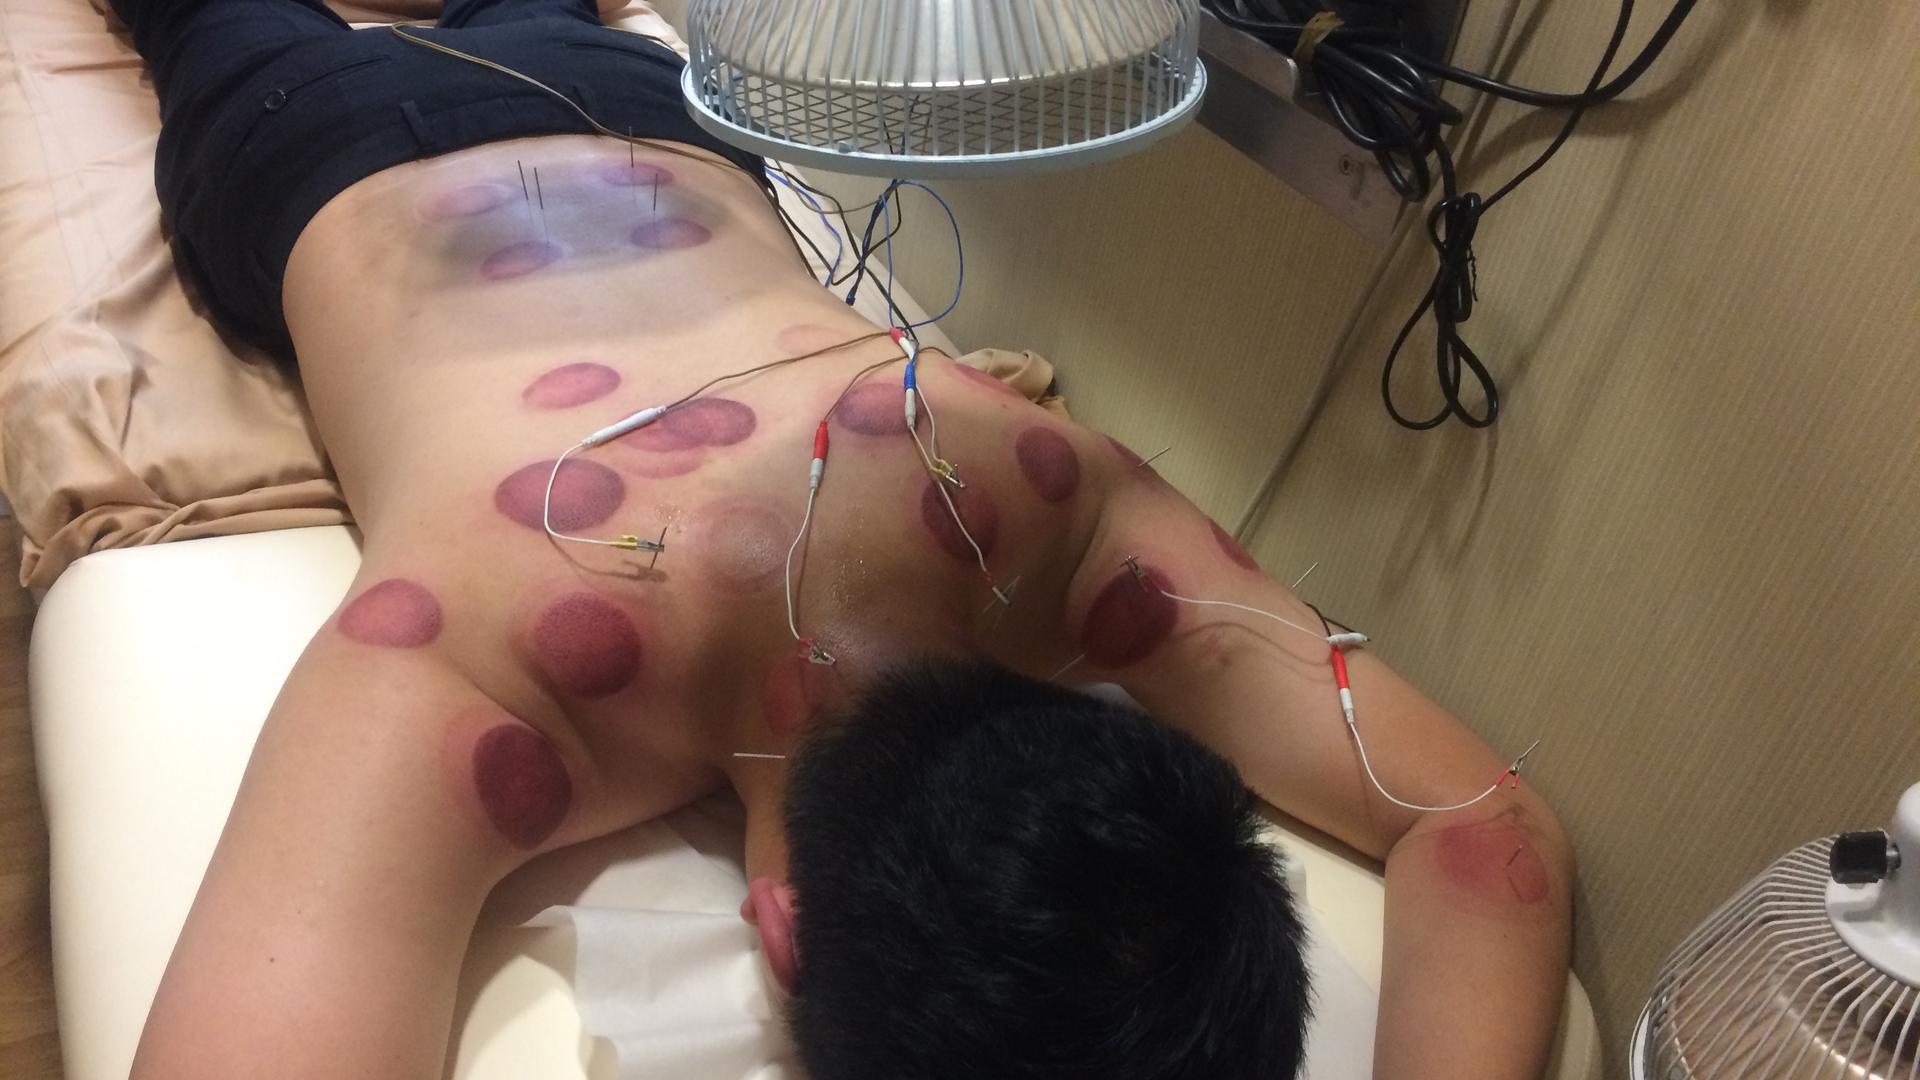 dark, purple circles are a visible result of cupping, another alternative treatment